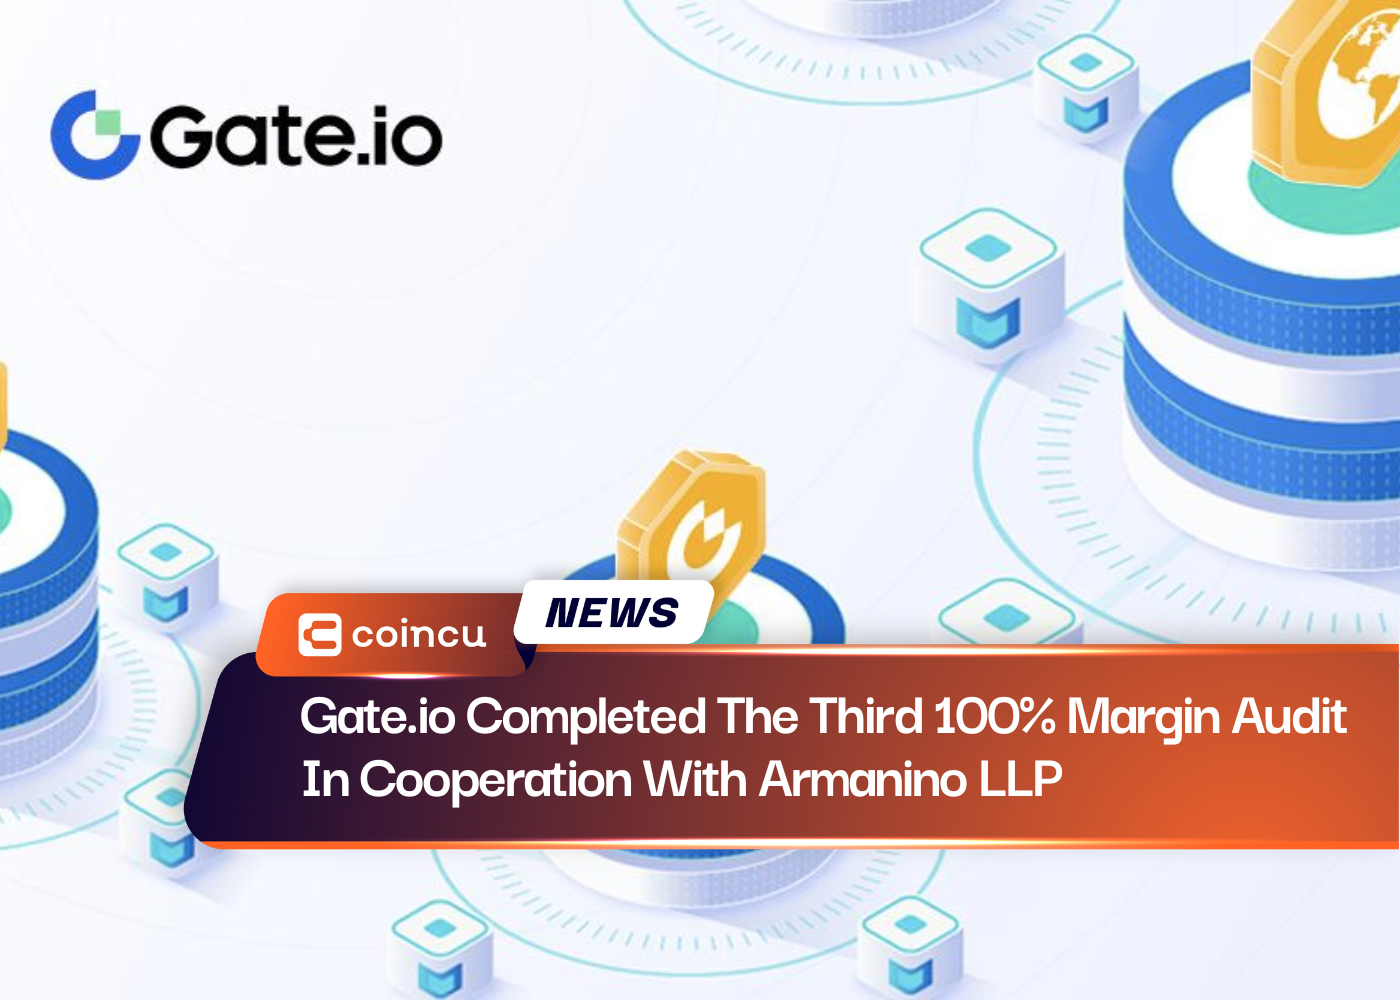 Gate.io Completed The Third 100% Margin Audit In Cooperation With Armanino LLP